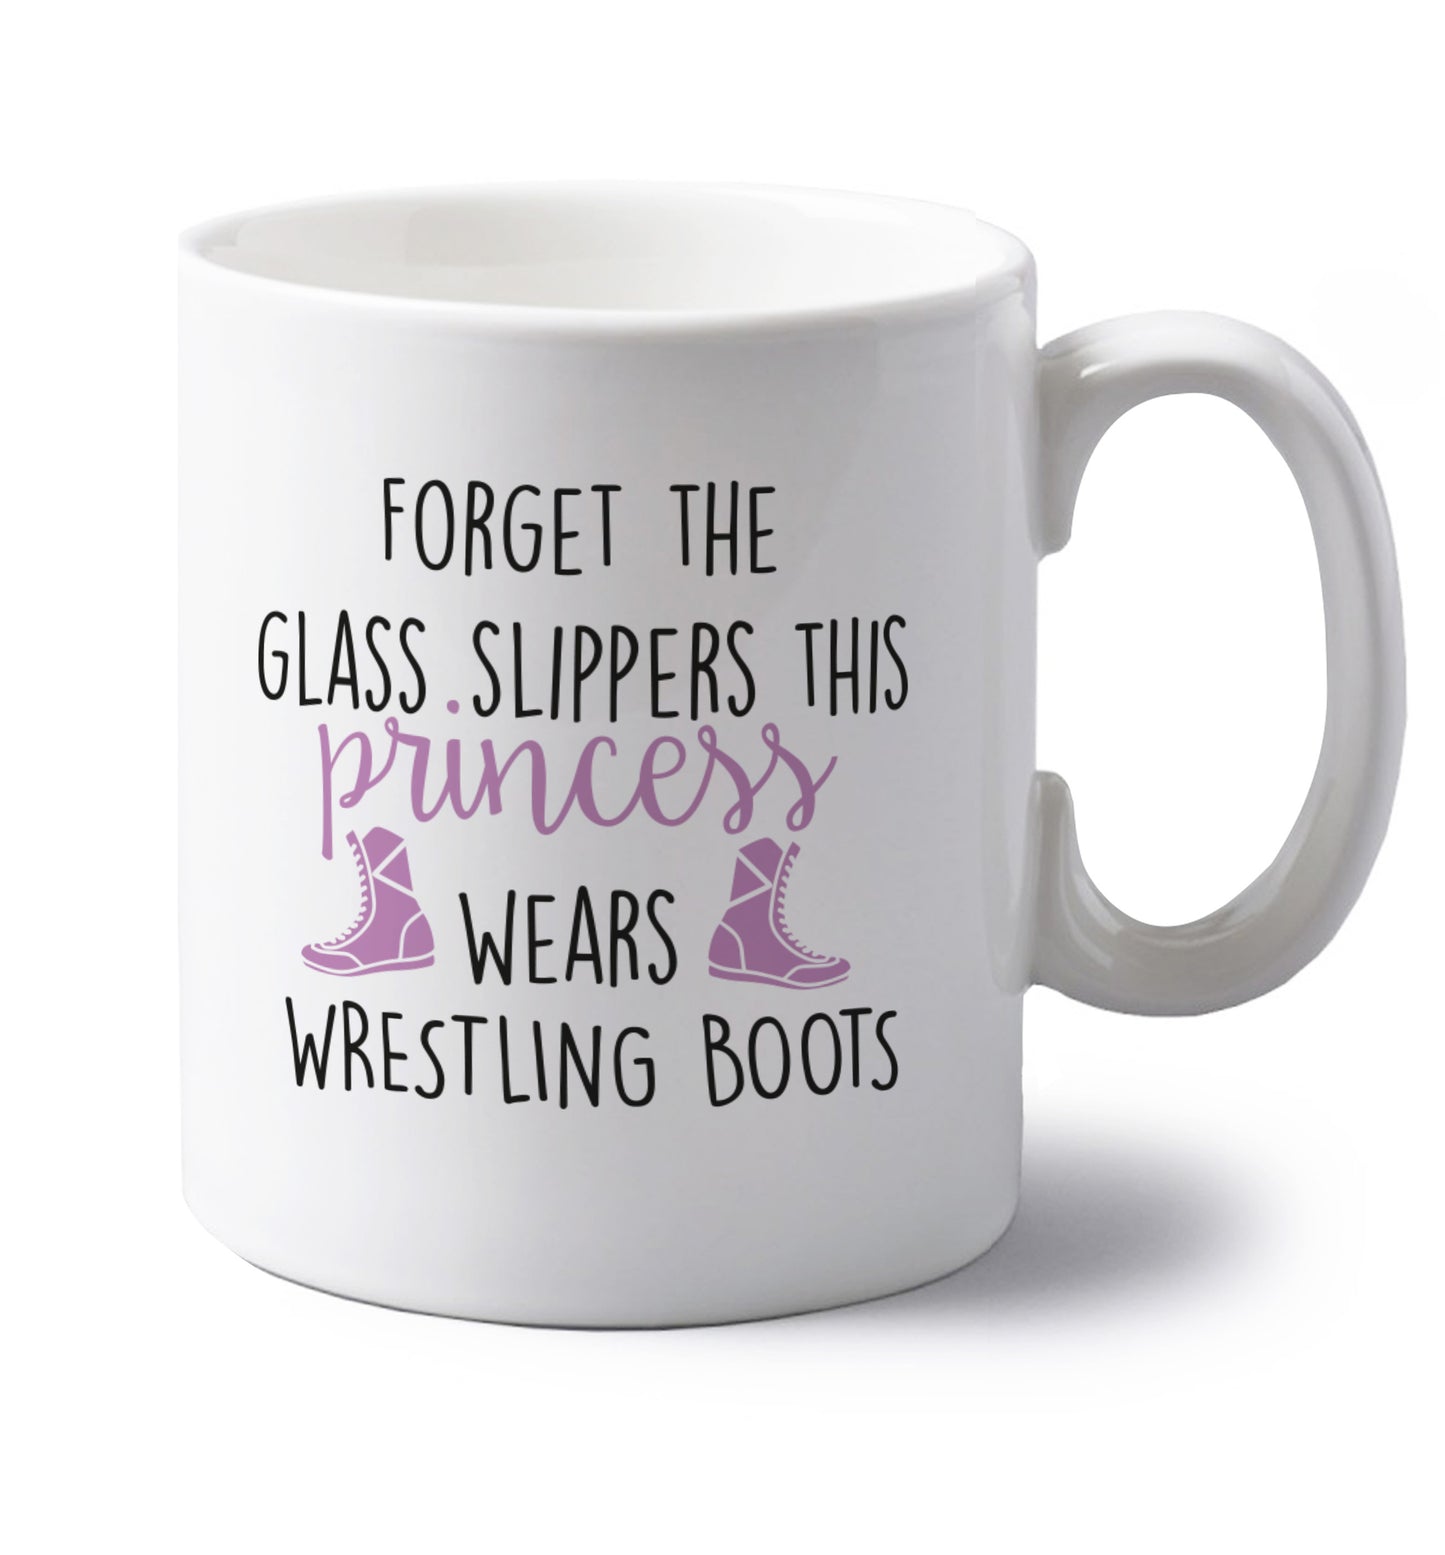 Forget the glass slippers this princess wears wrestling boots left handed white ceramic mug 